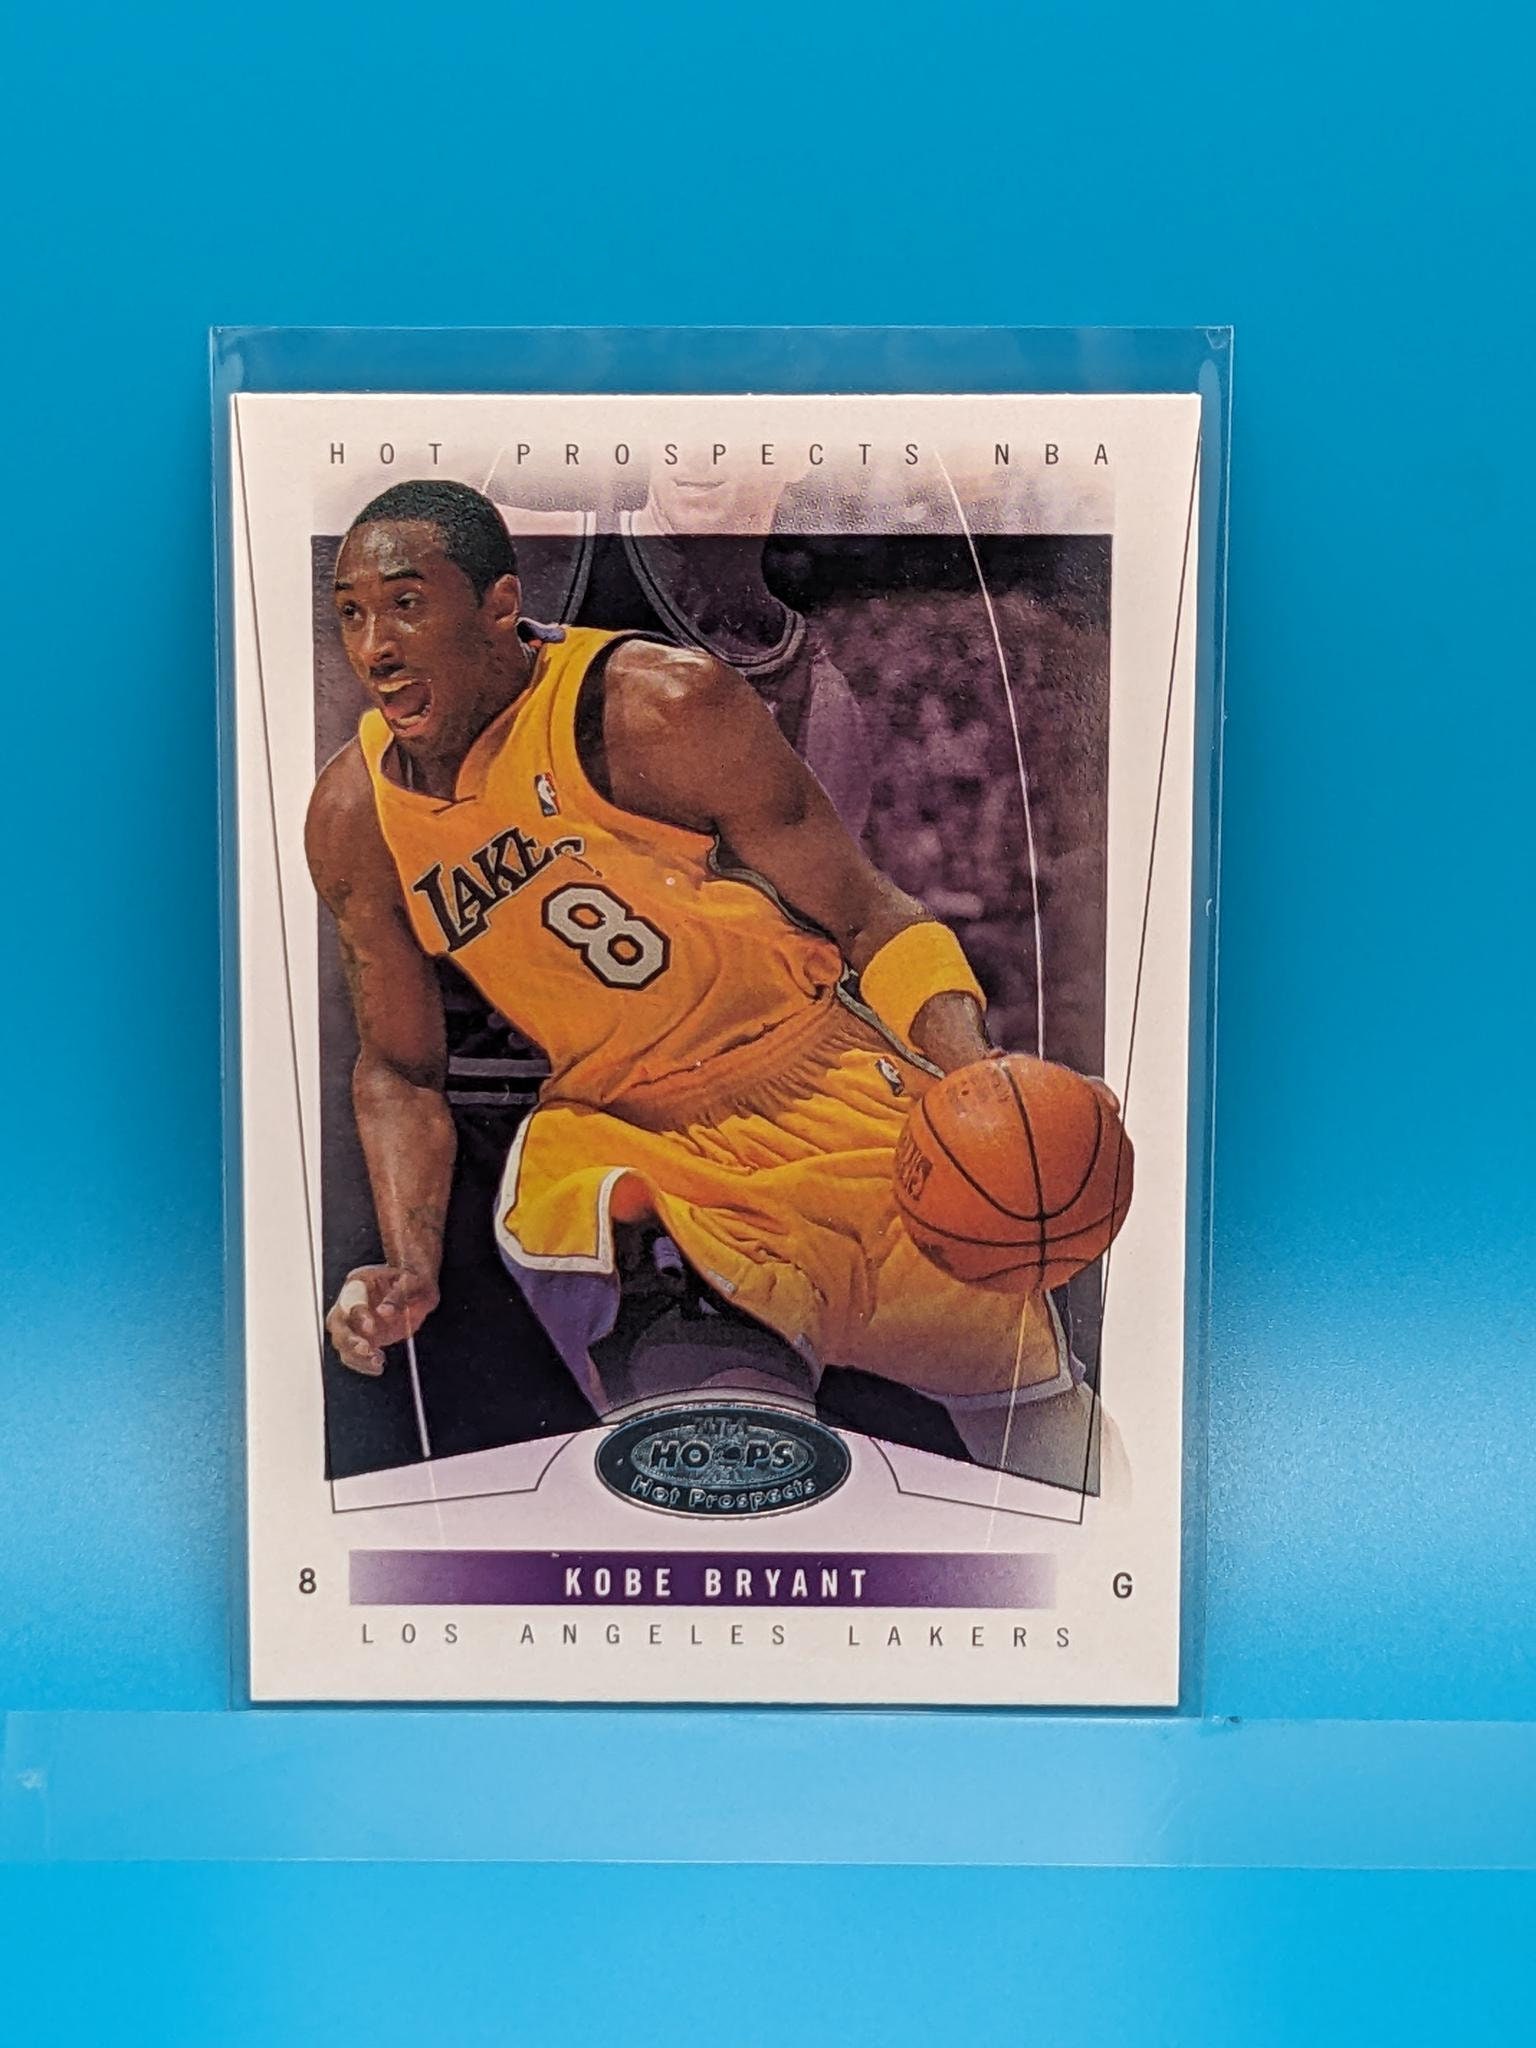 Kobe Bryant 2007 2008 Topps Basketball Series Mint Card #24 Showing This  Los Angeles Lakers Star in His Gold Jersey